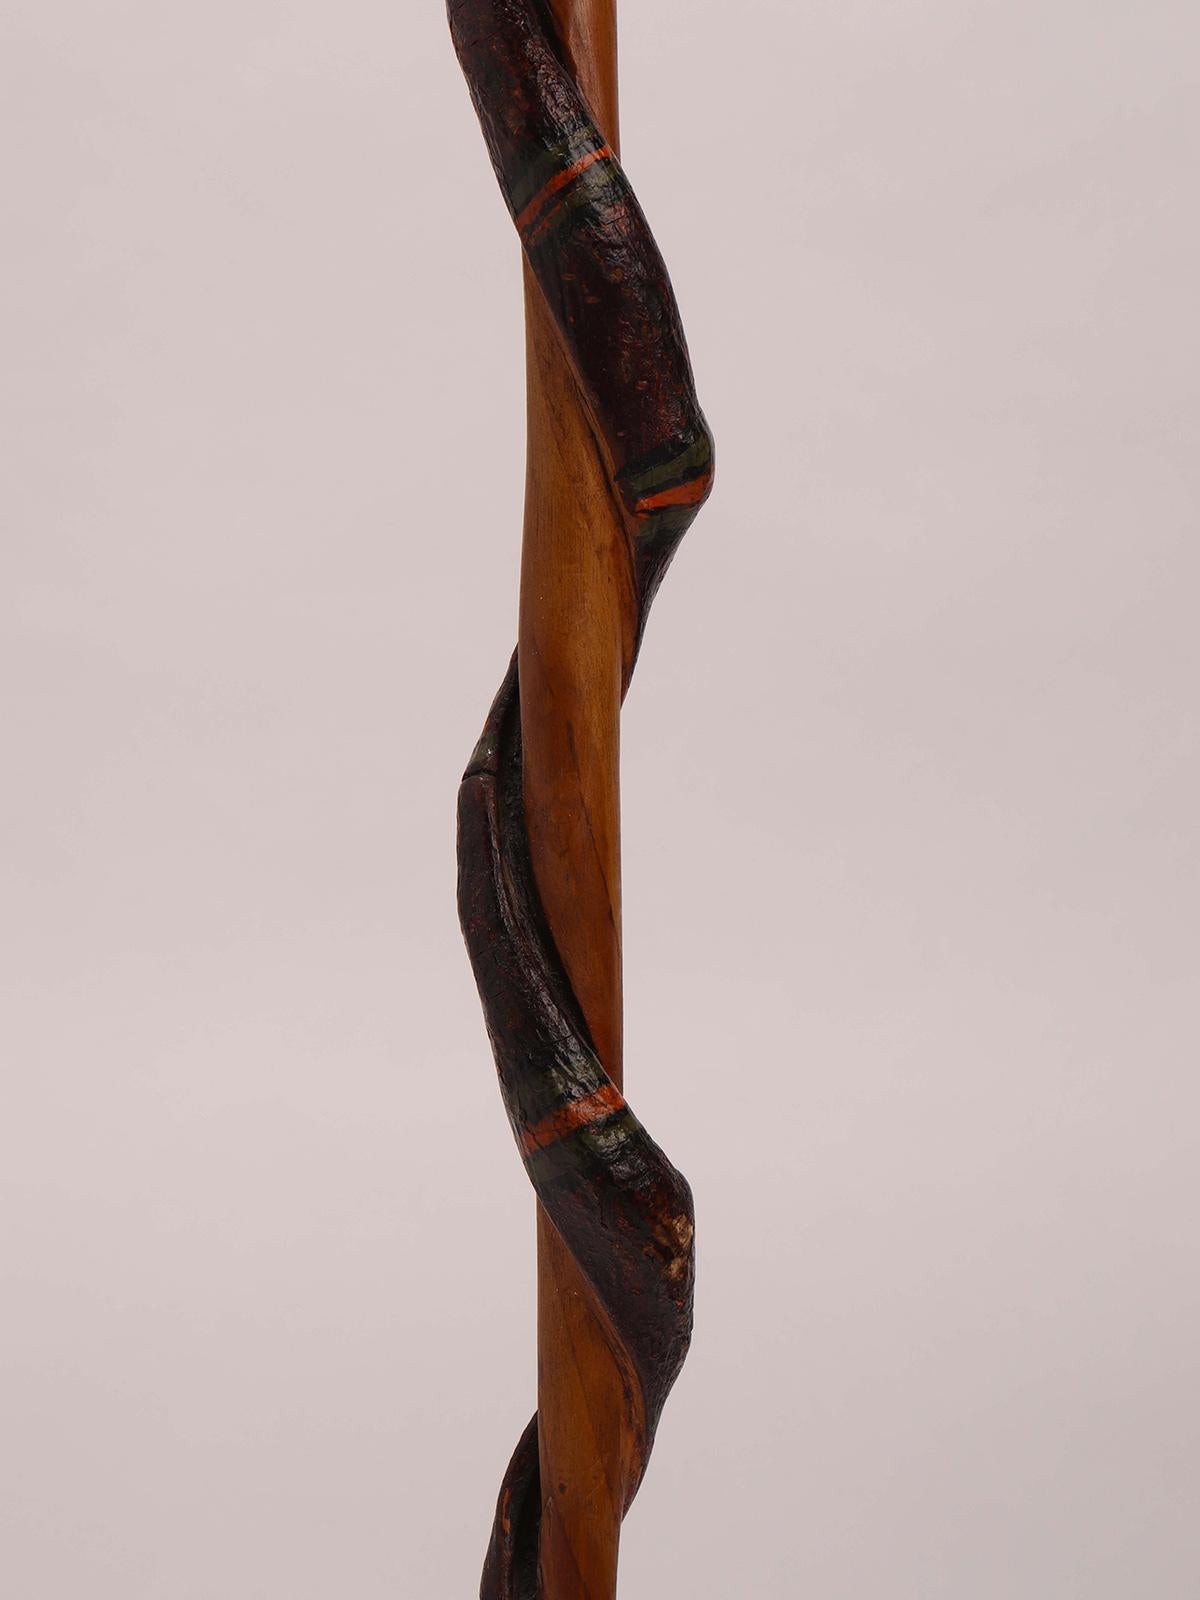 Folk Art Walking Stick, USA 1880 In Good Condition For Sale In Milan, IT